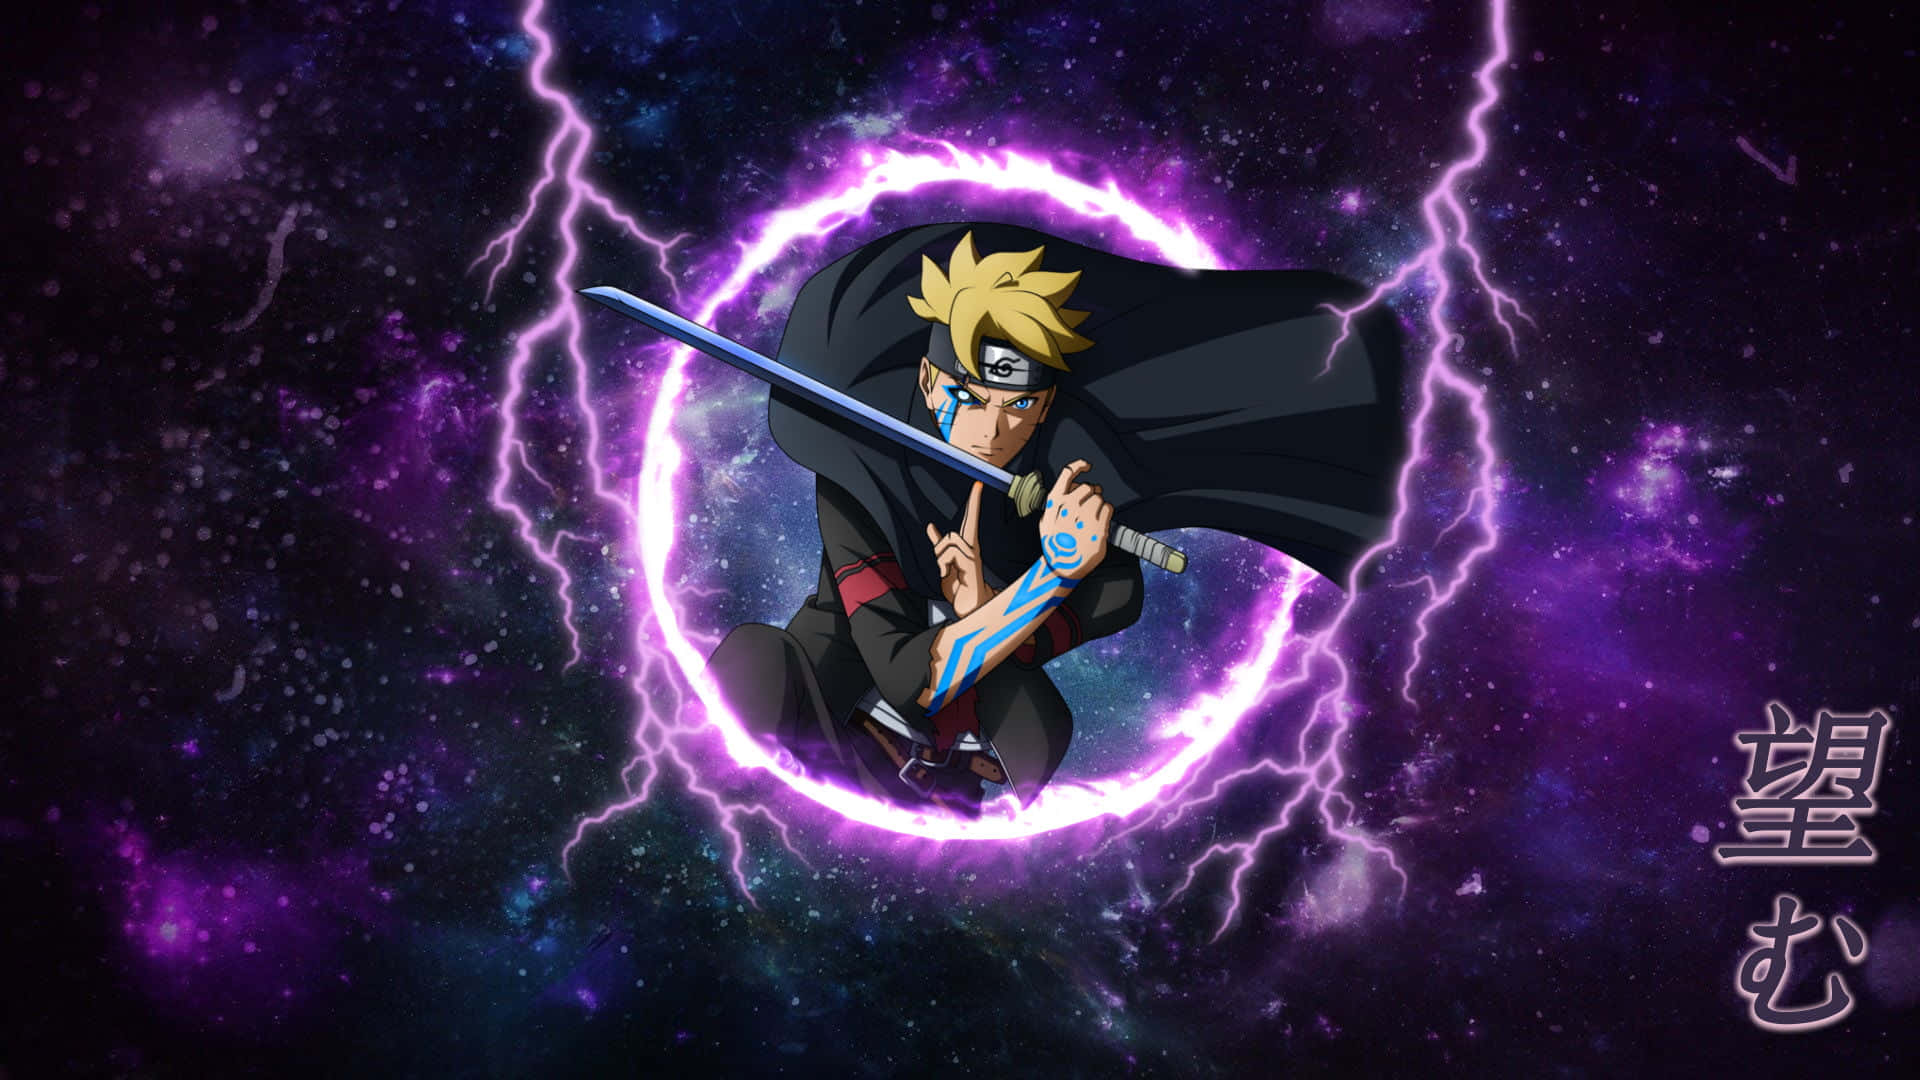 1300+ Boruto HD Wallpapers and Backgrounds